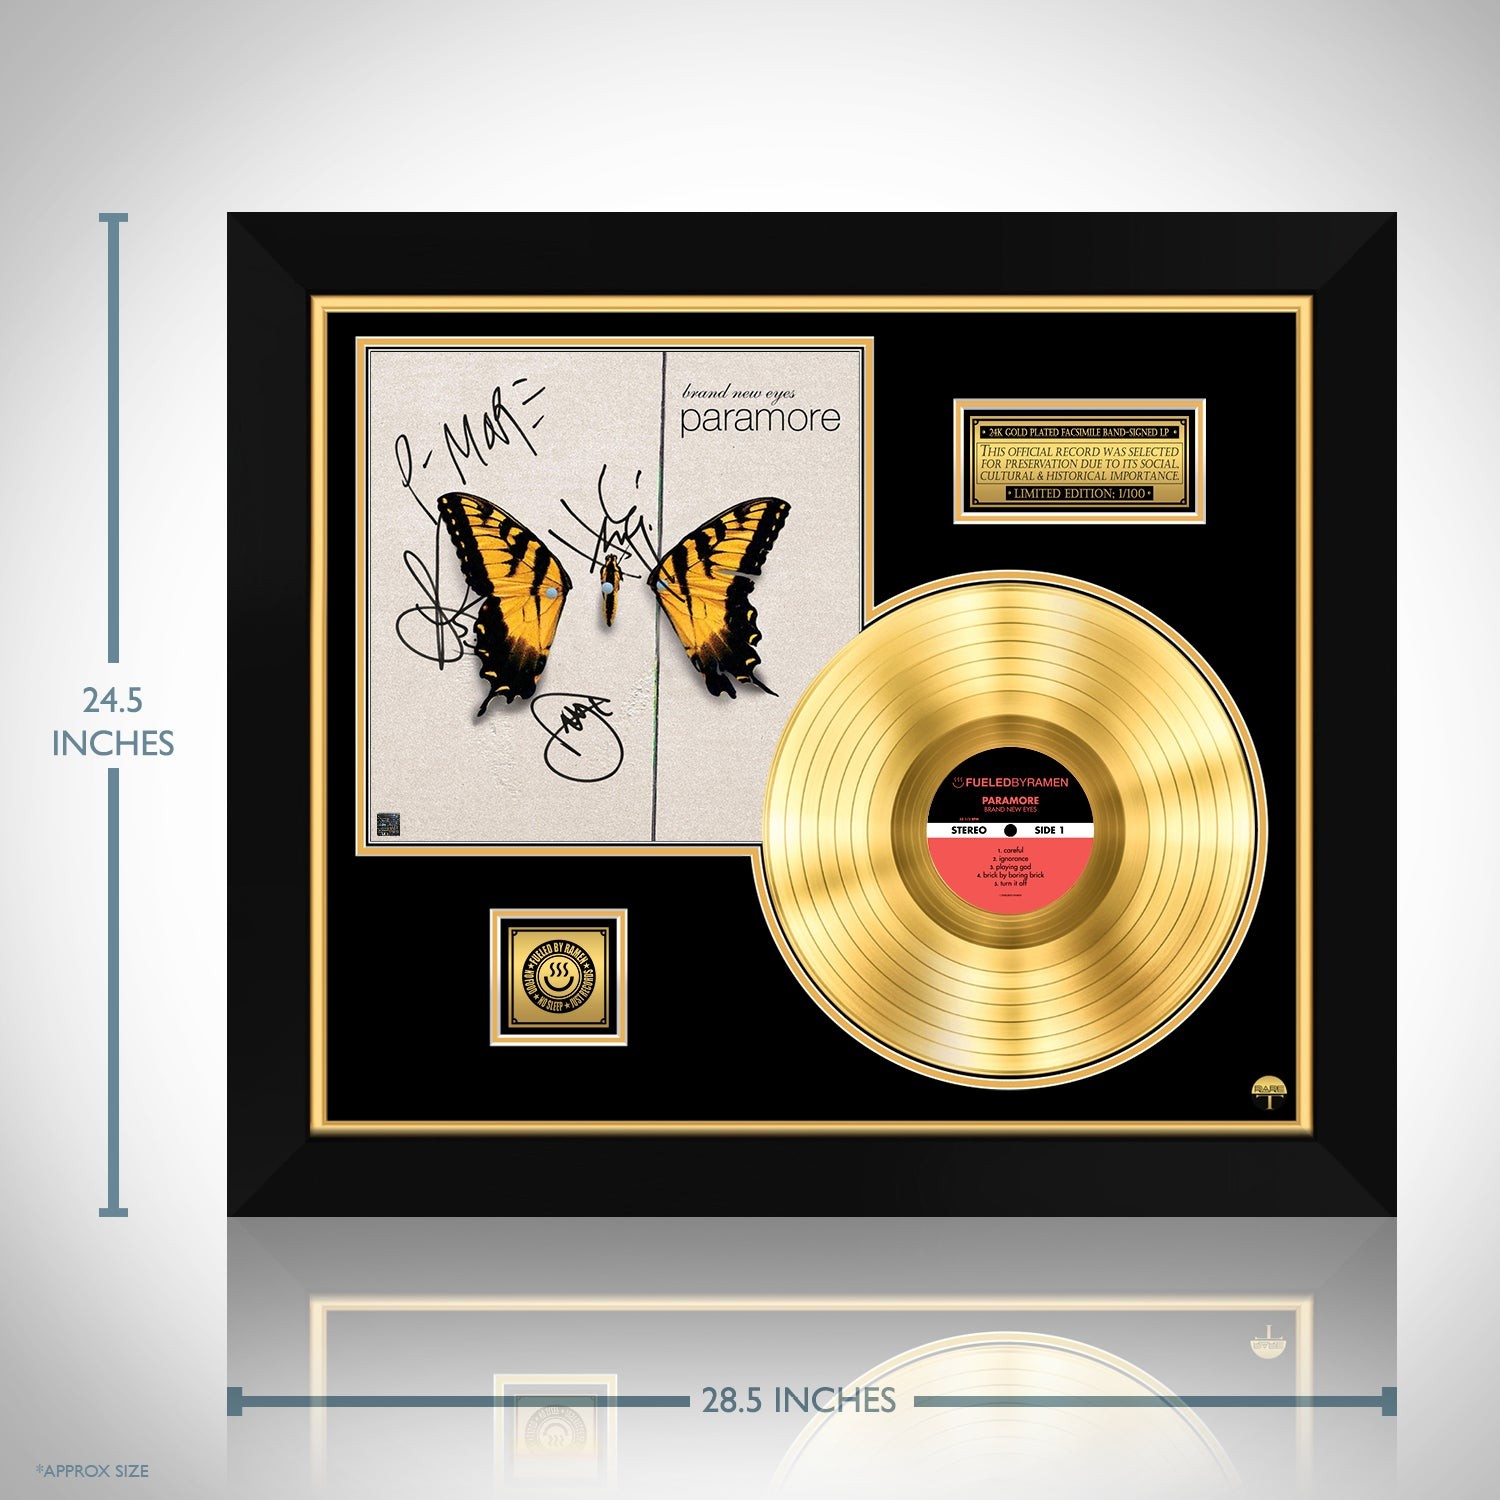  Paramore - Brand New Eyes (Limited Edition Box Set w/ 7  Ignorance Vinyl) - Rare - auction details